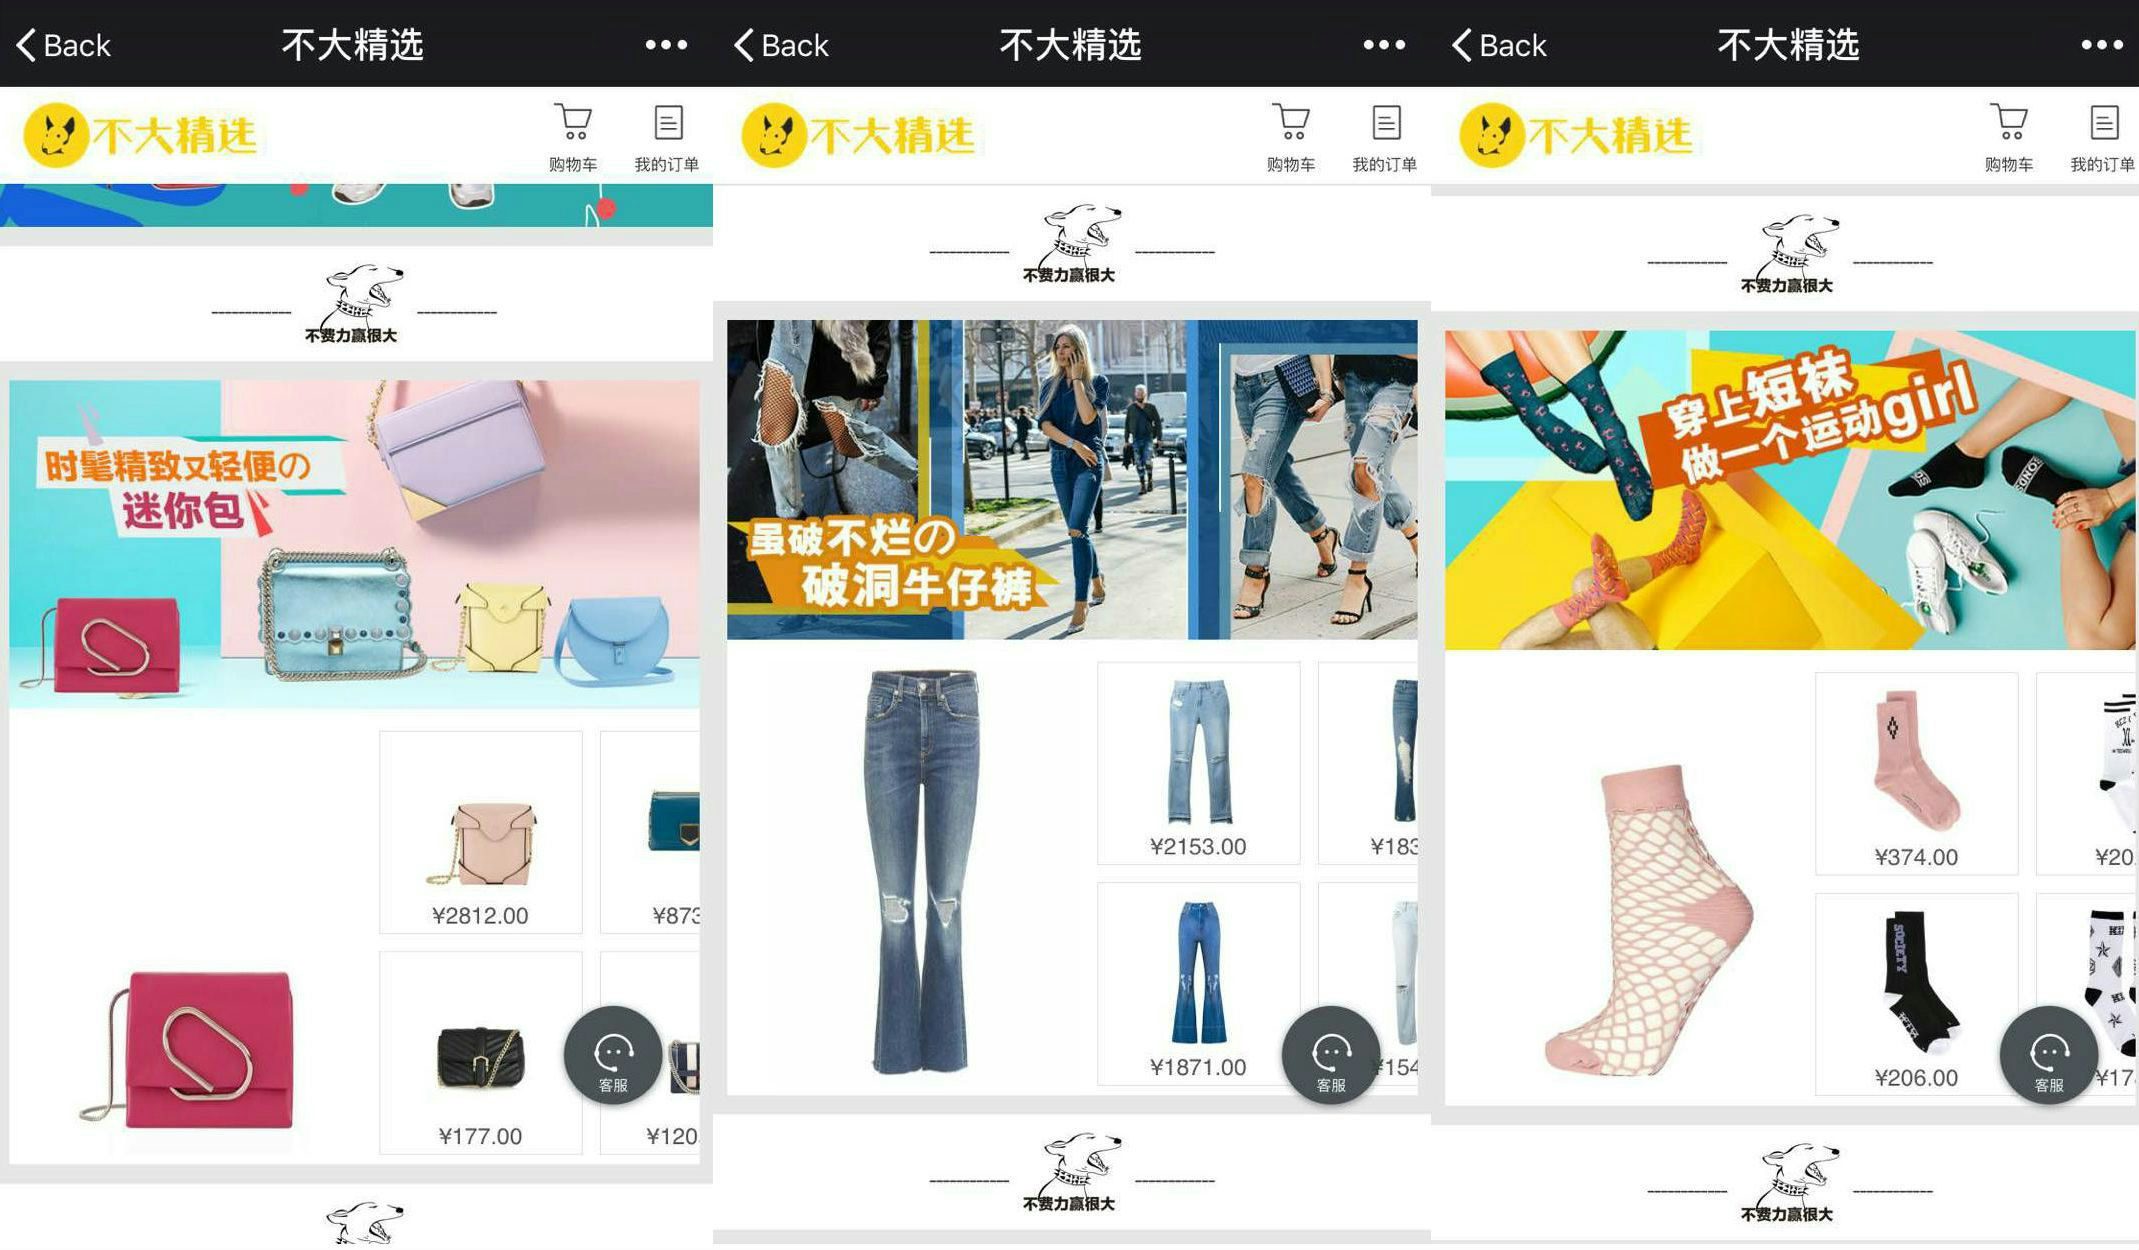 Gogoboi Teams Up with Western E-Commerce Retailers to Sell Luxury on WeChat